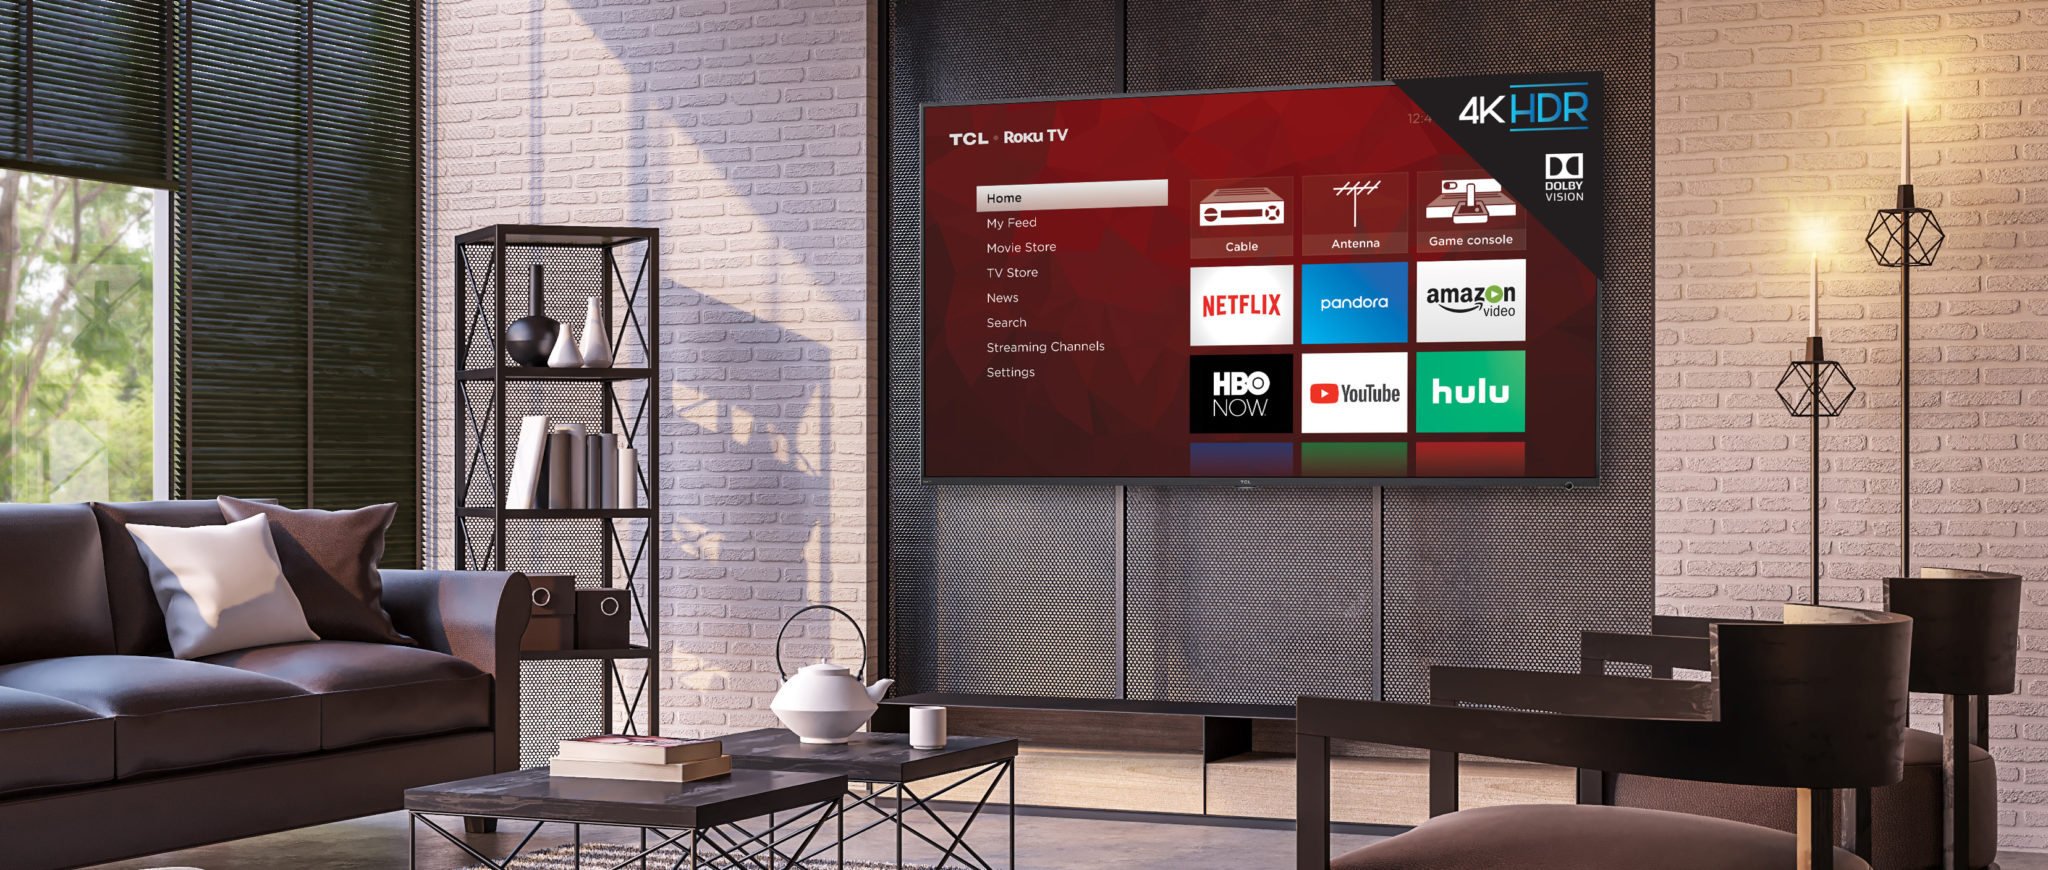 Ends Tonight: Enter Now For a Chance to Win a 65″ 4K HDR Roku TV From TCL, Antennas Direct Antenna, & a $100 Sling TV Gift Card